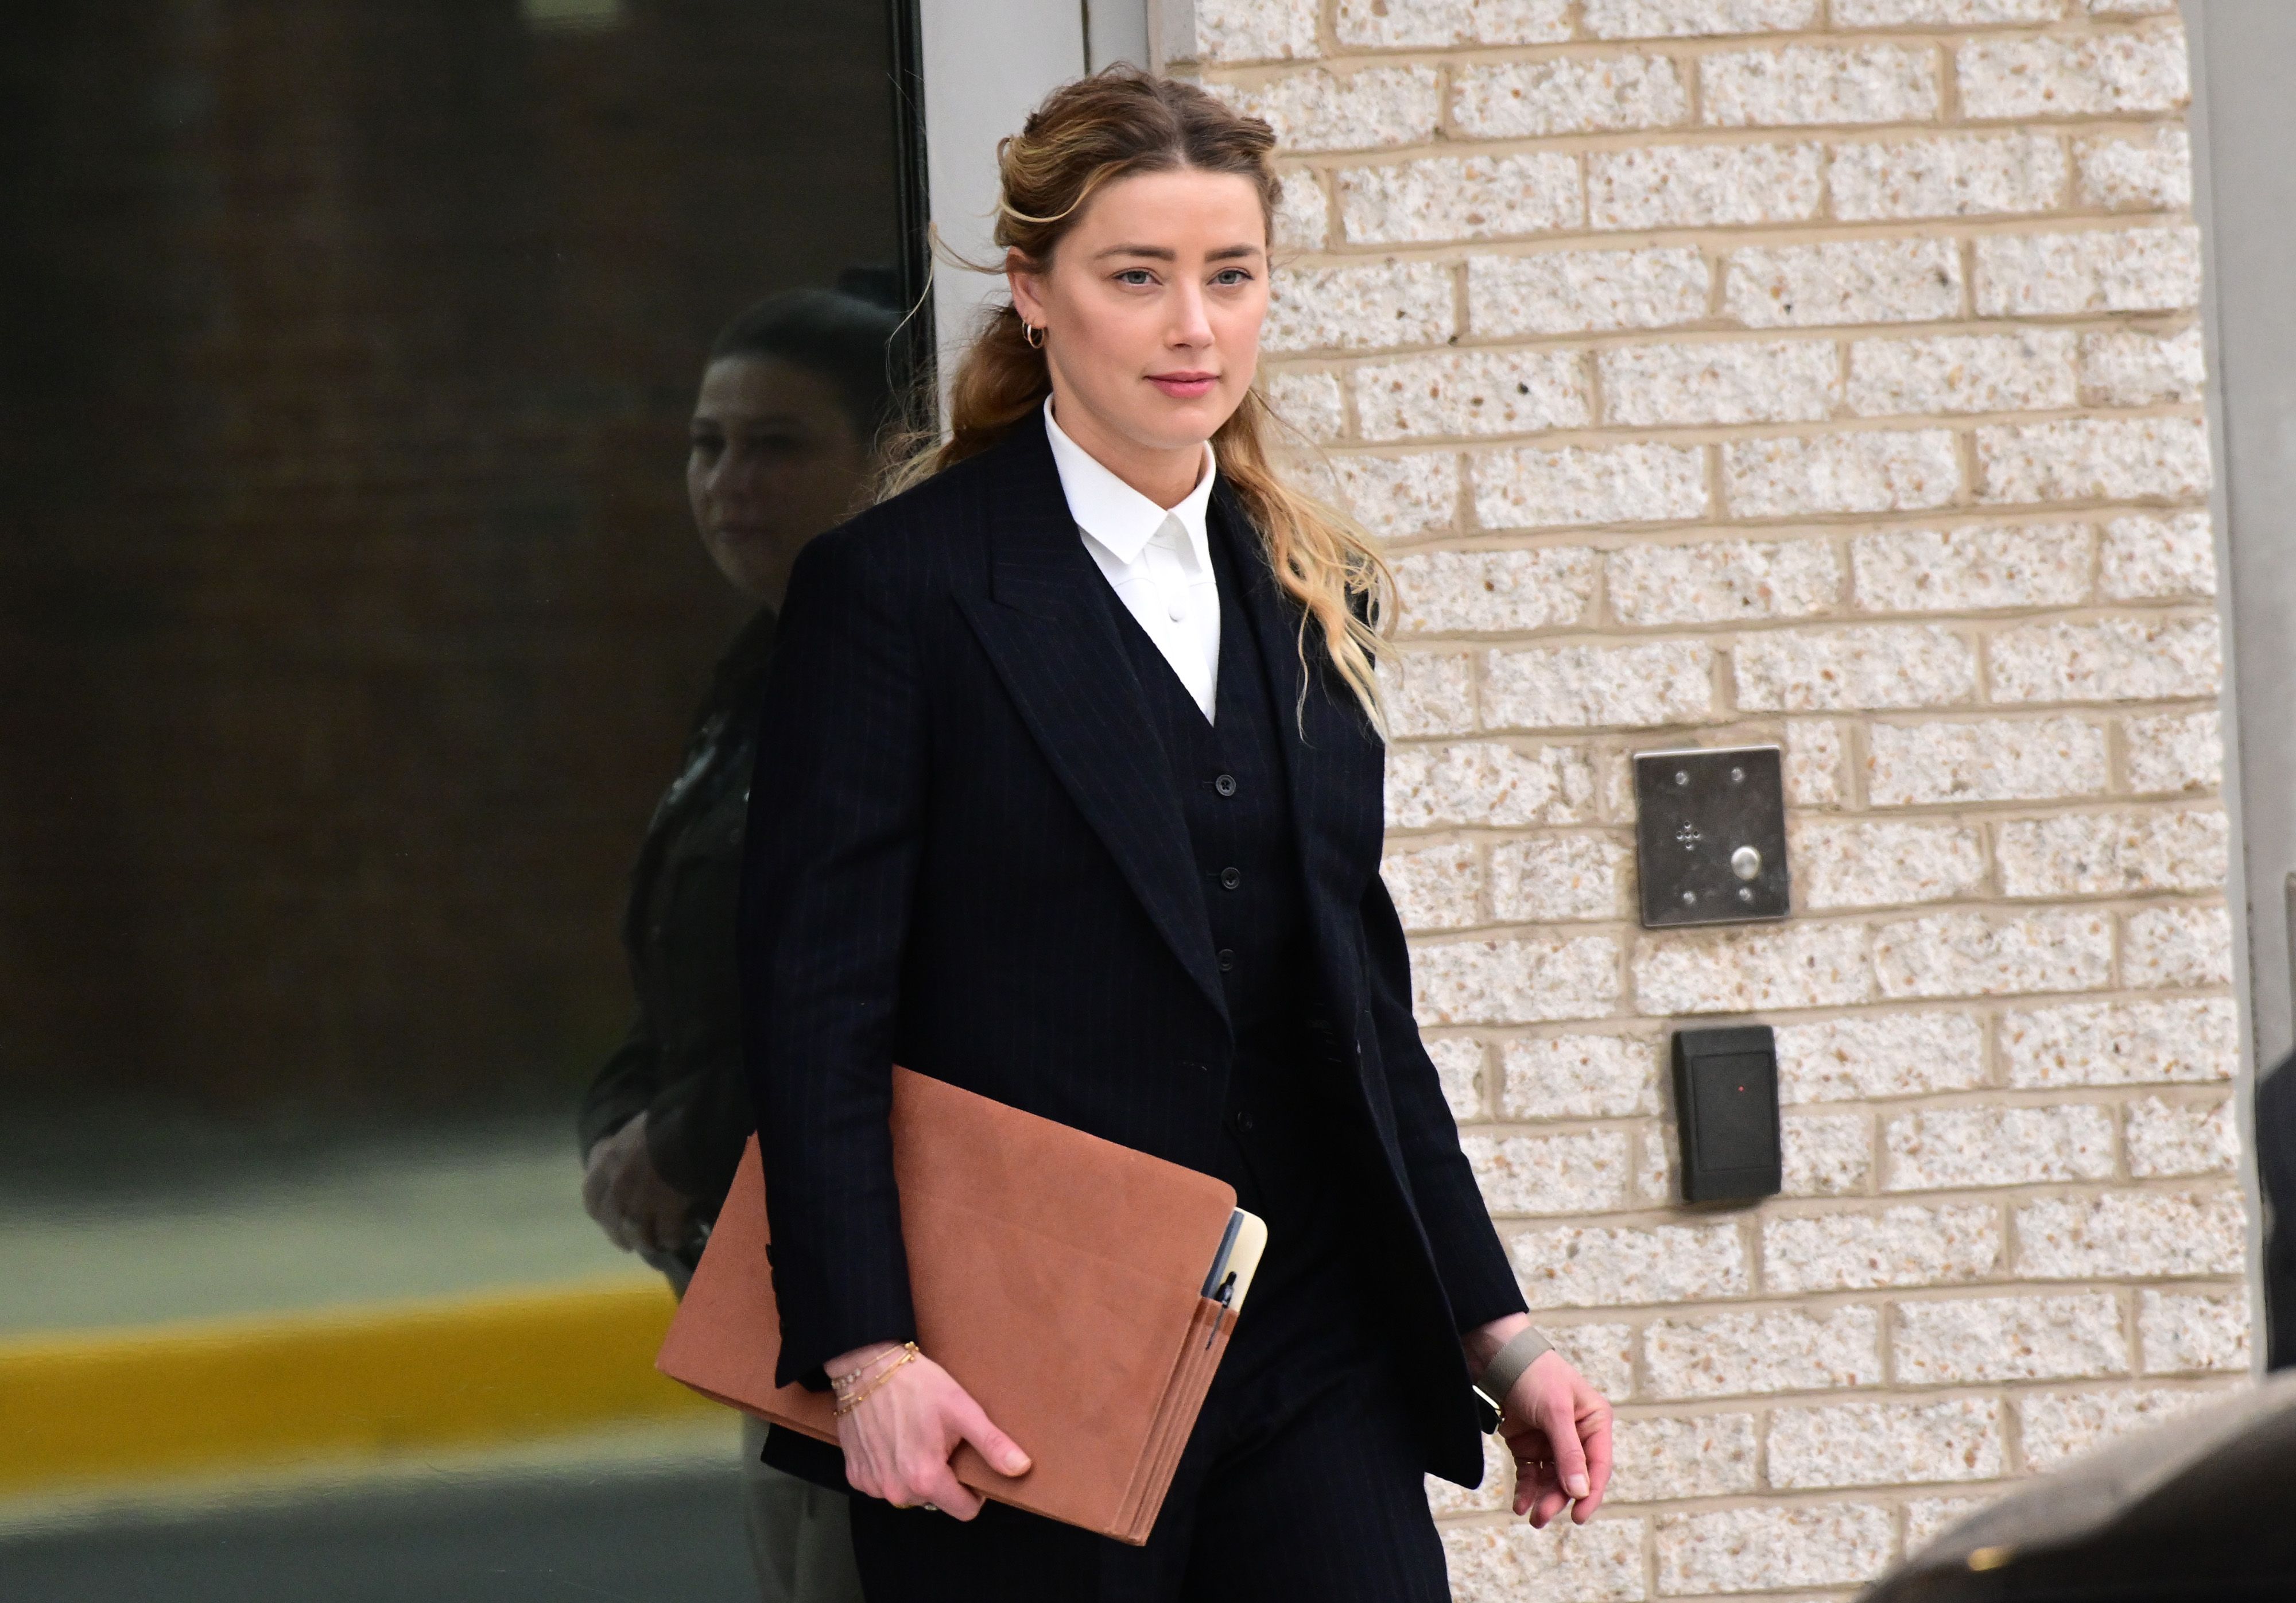 Where Is Amber Heard Now? Life After The Depp Defamation Trial